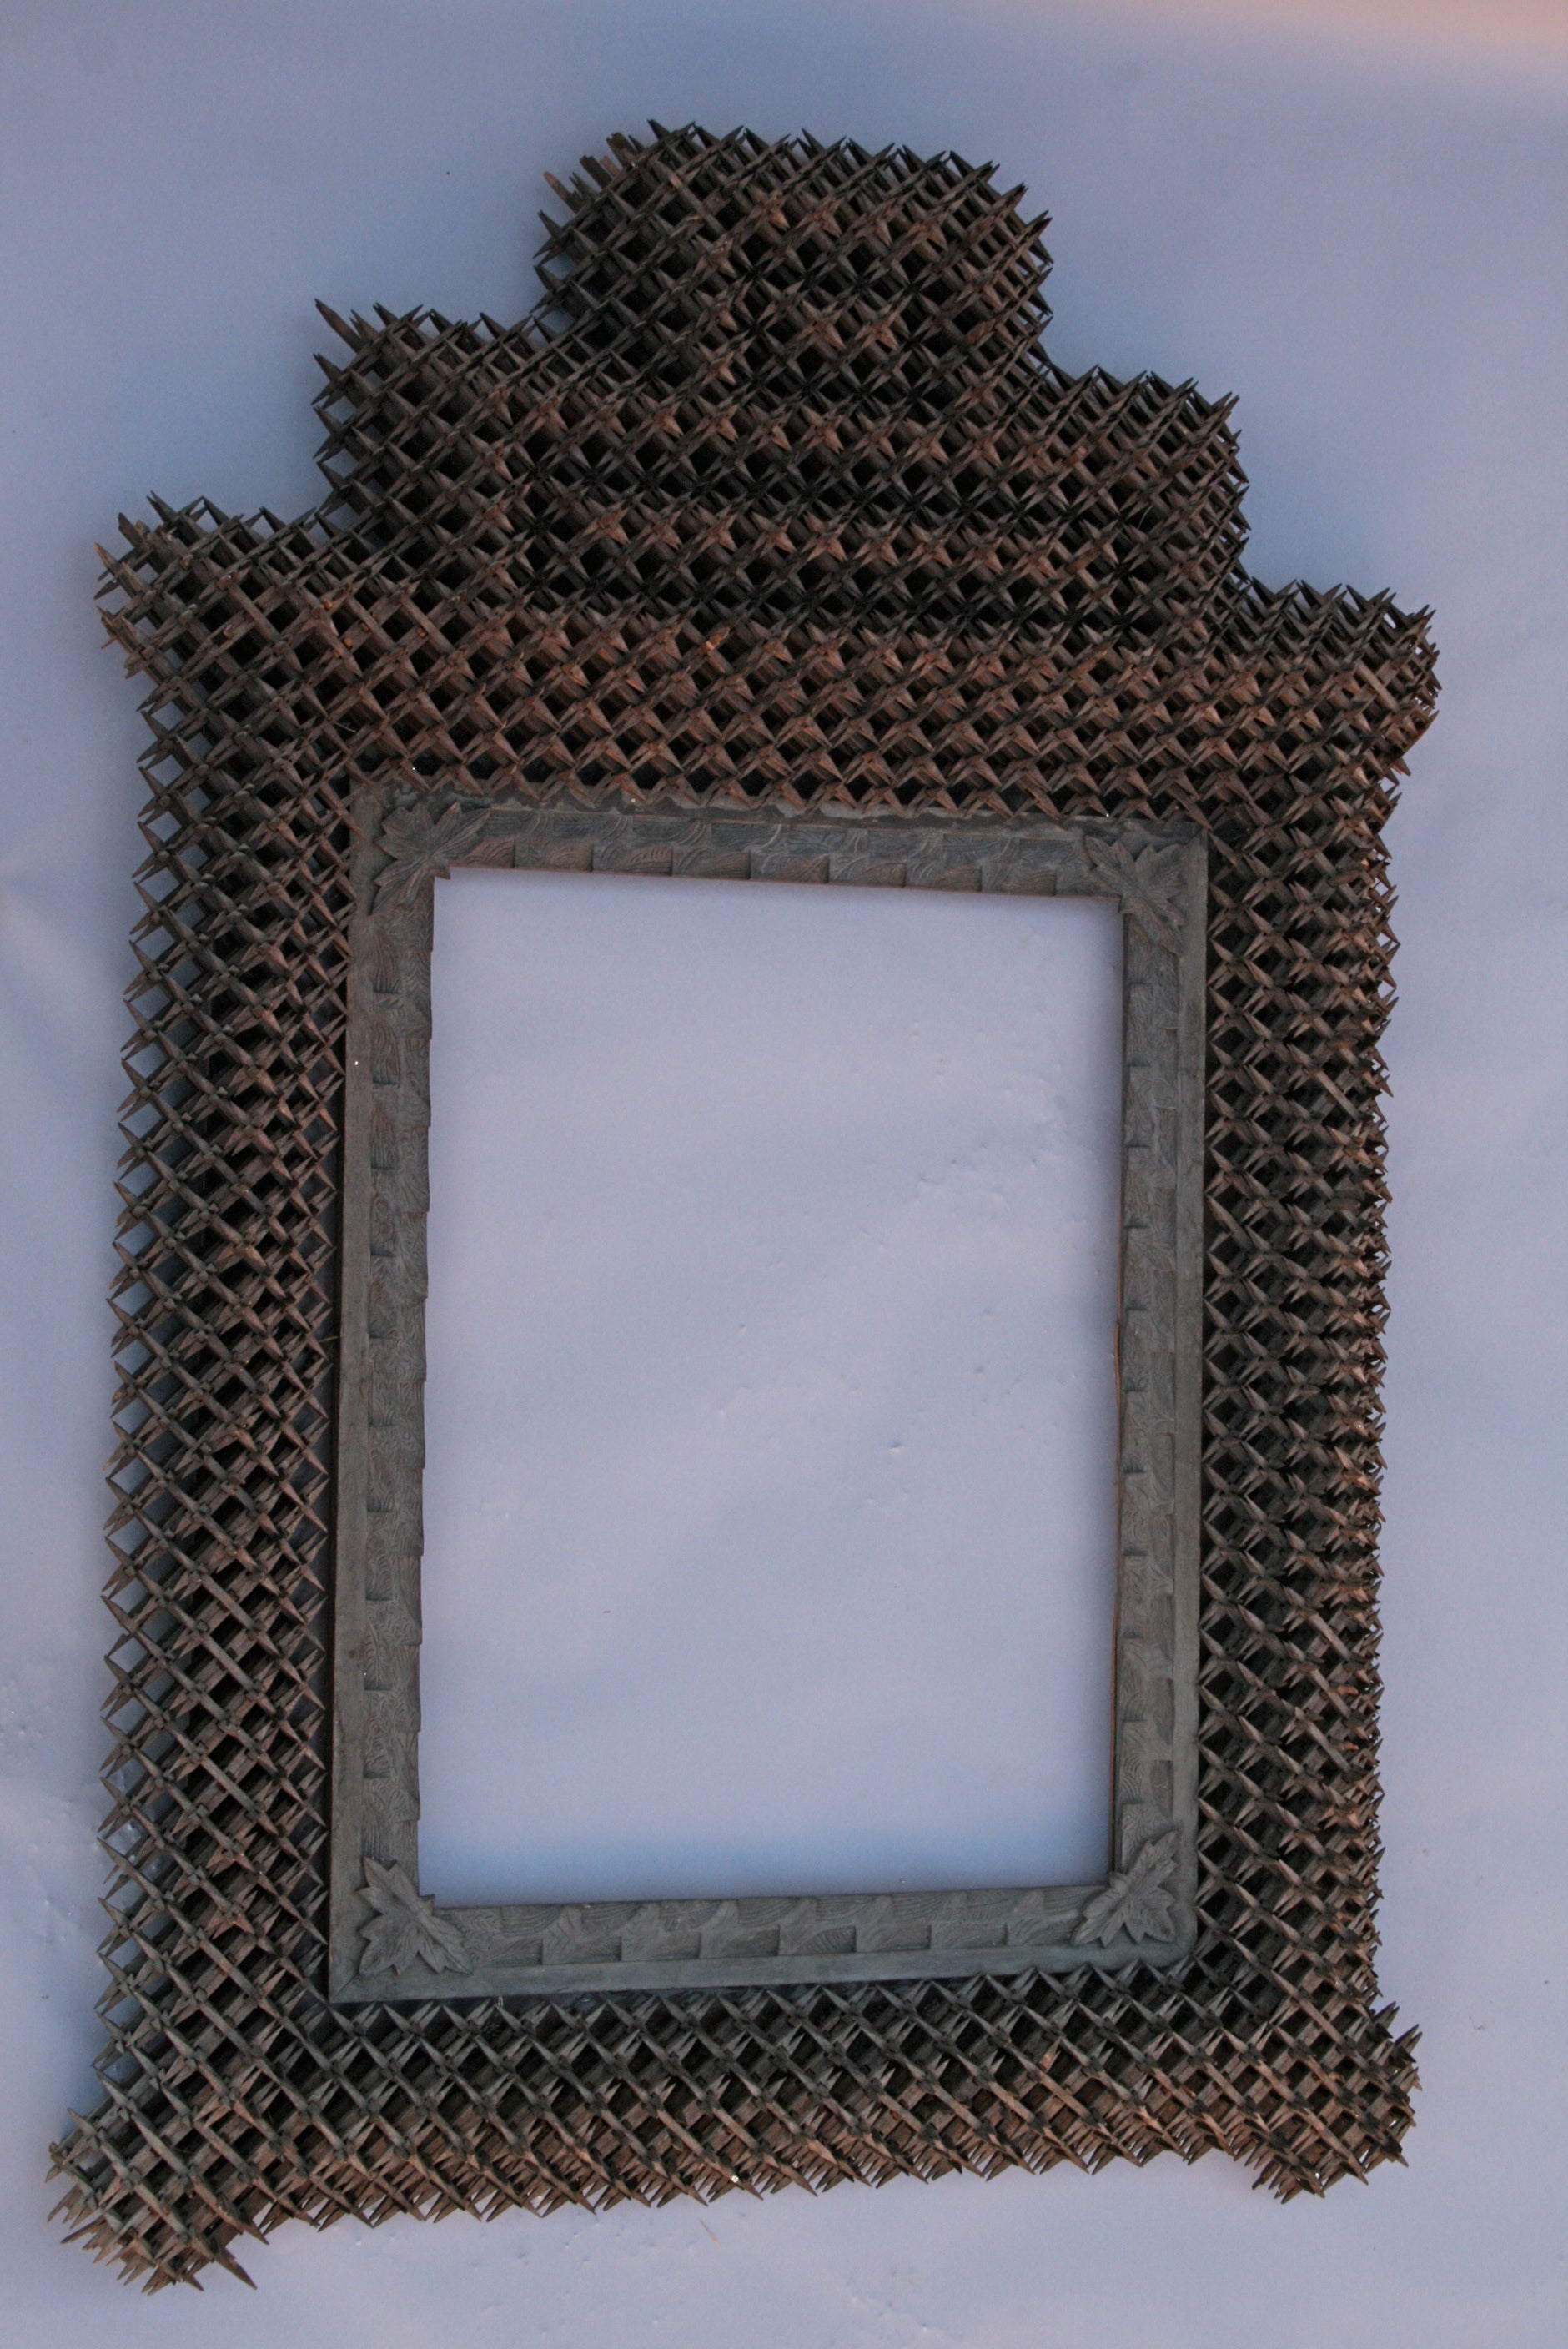 Outstanding Large-Scale Turn-of-the-Century "Crown Of Thorns" Frame